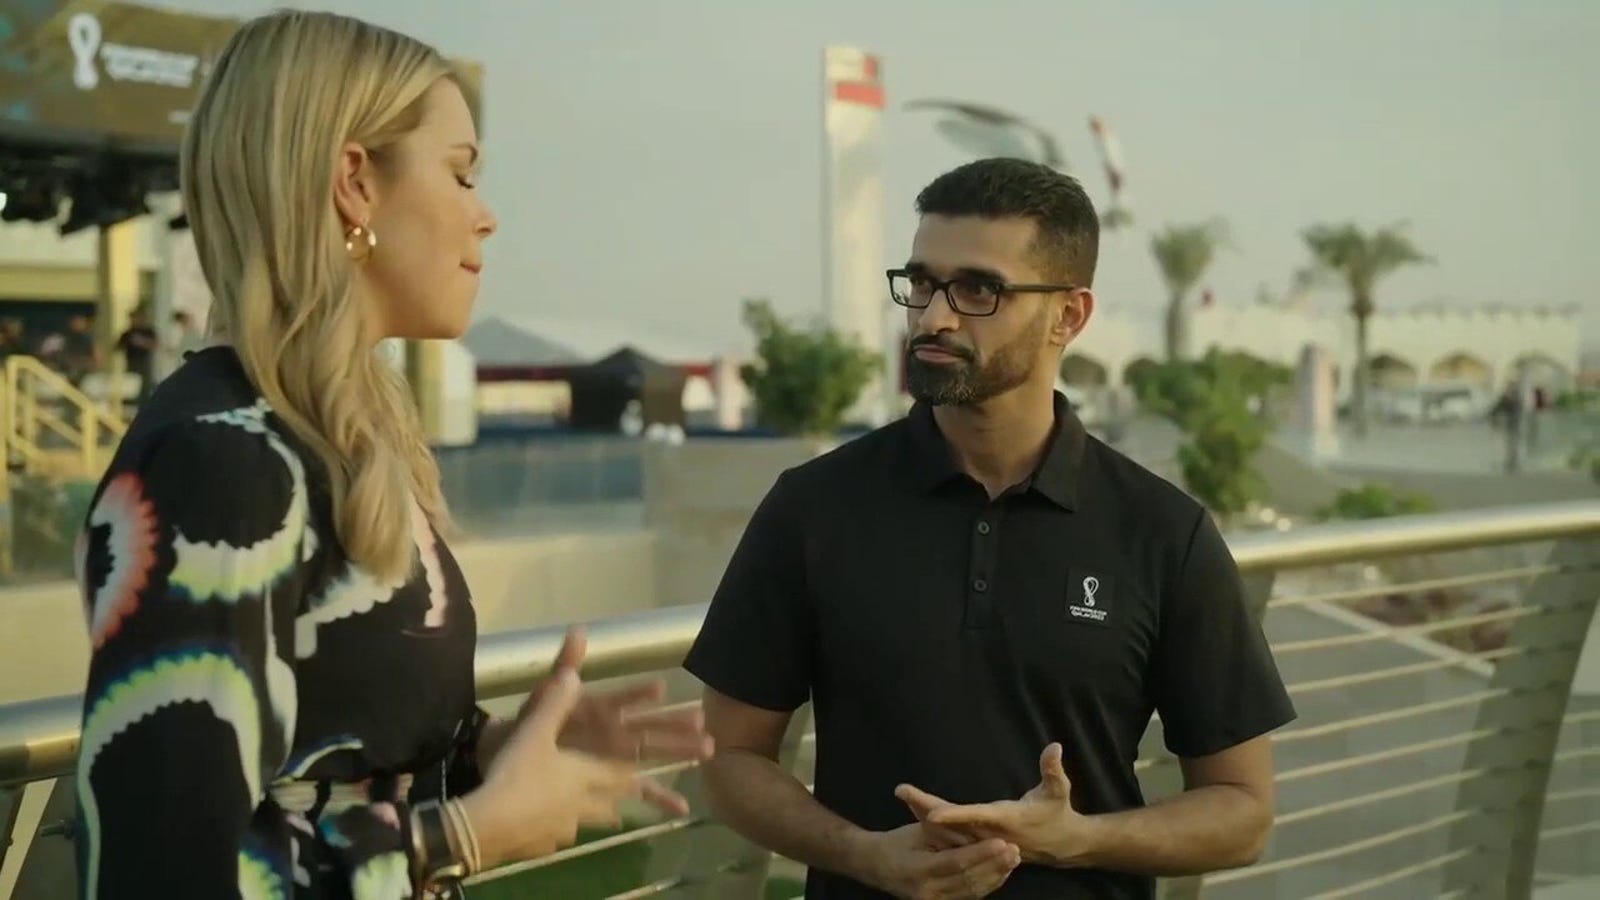 Jenny Taft explores the culture of Qatar ahead of the 2022 FIFA World Cup